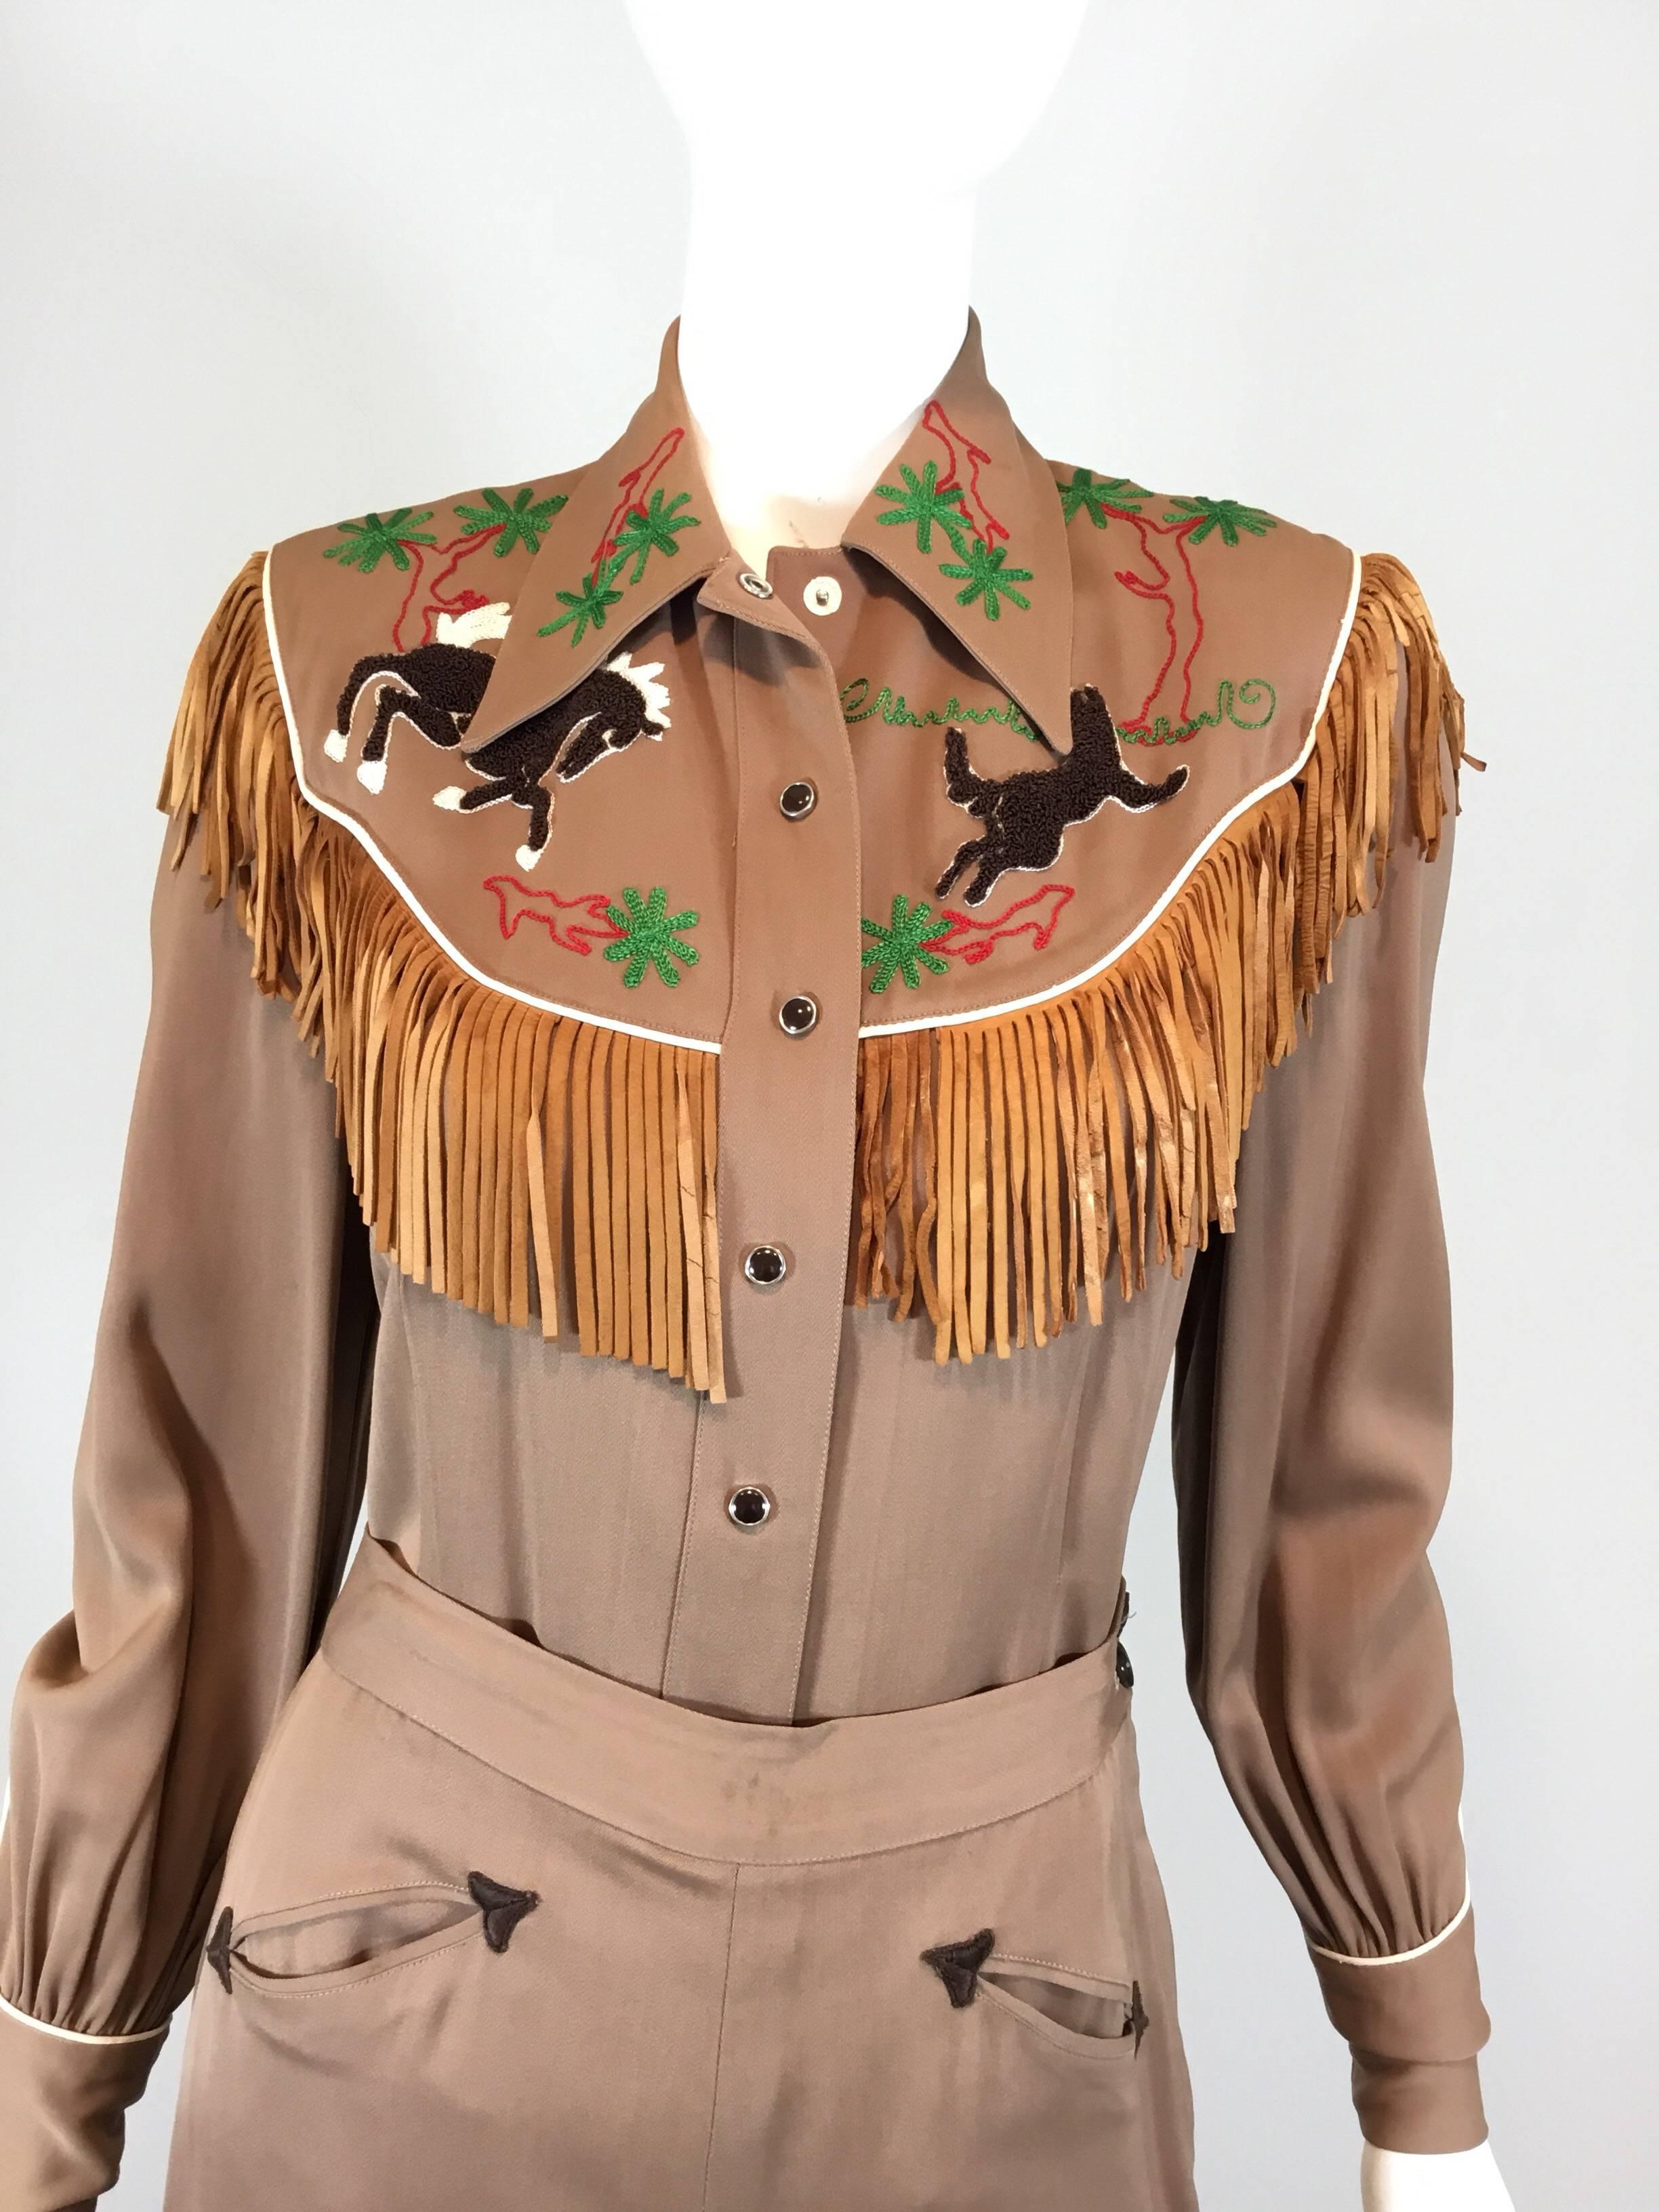 Hillbilly Westerns 1940's Western performing parade outfit for a cowgirl. Shirt features snap button fastenings along the front and on the cuffs, gabardine fabric with a fringed leather trim and an embroidered western design at the front and back.